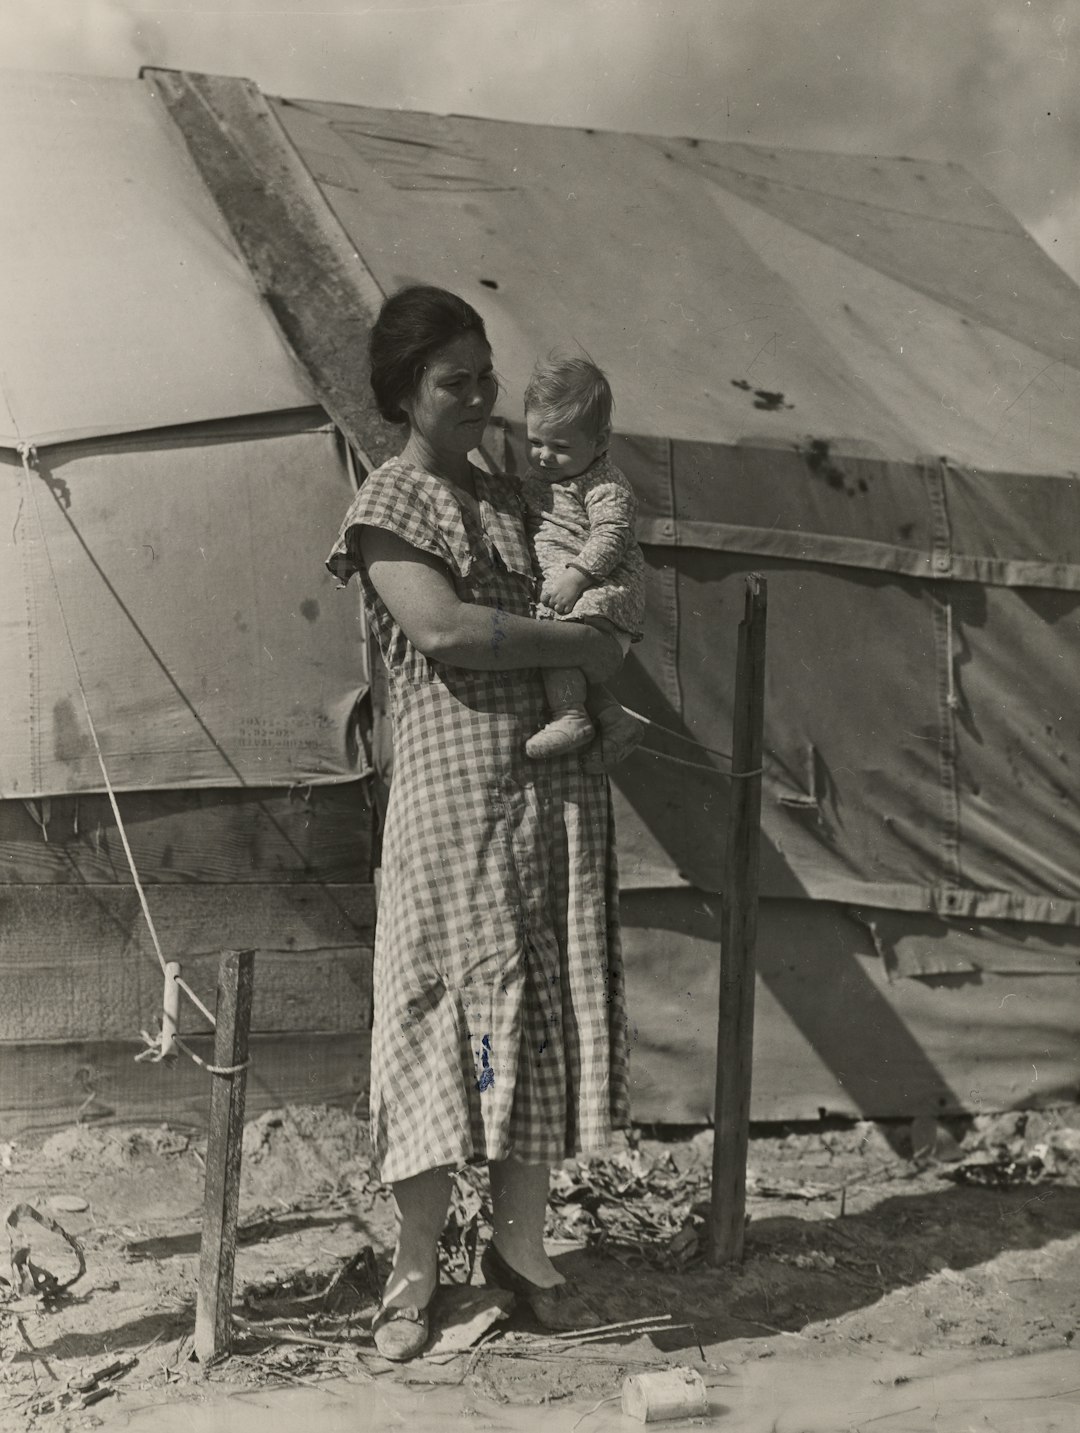 grayscale photo of woman in checked dress carrying her child while standing beside white tent